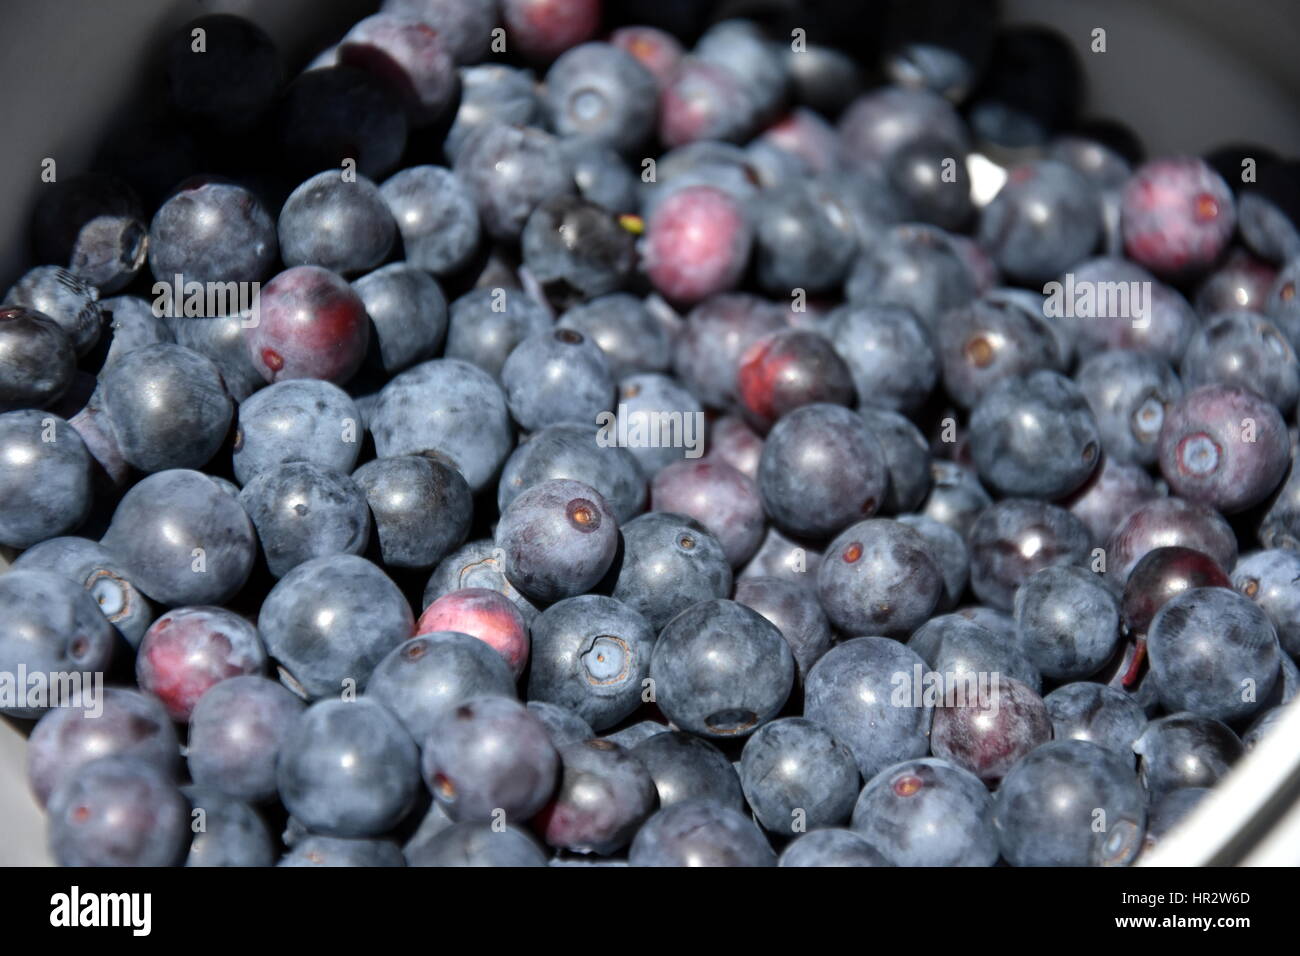 Freshly picked wild blueberries. Fresh Blueberries or Bilberries. group of blueberry or stack of blueberries concept. Stock Photo